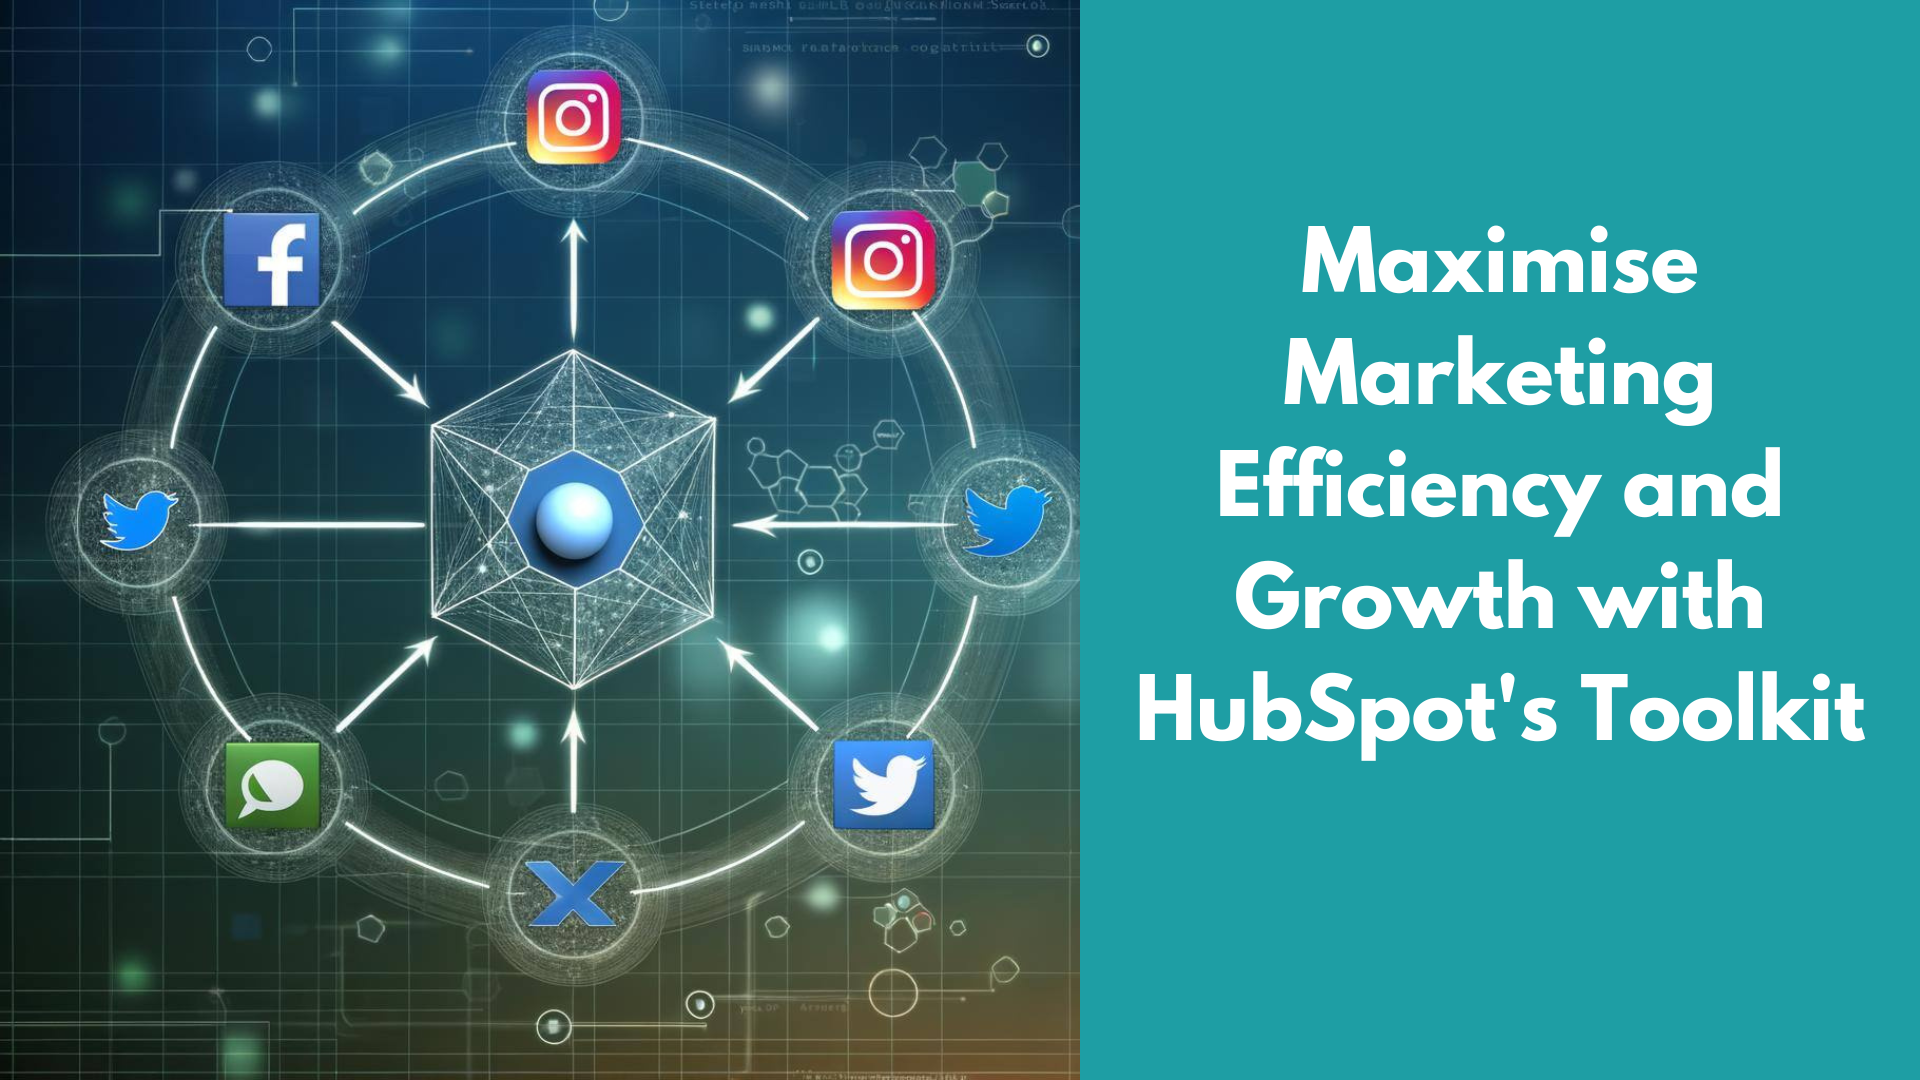 Maximise Marketing Efficiency and Growth with HubSpot's Toolkit